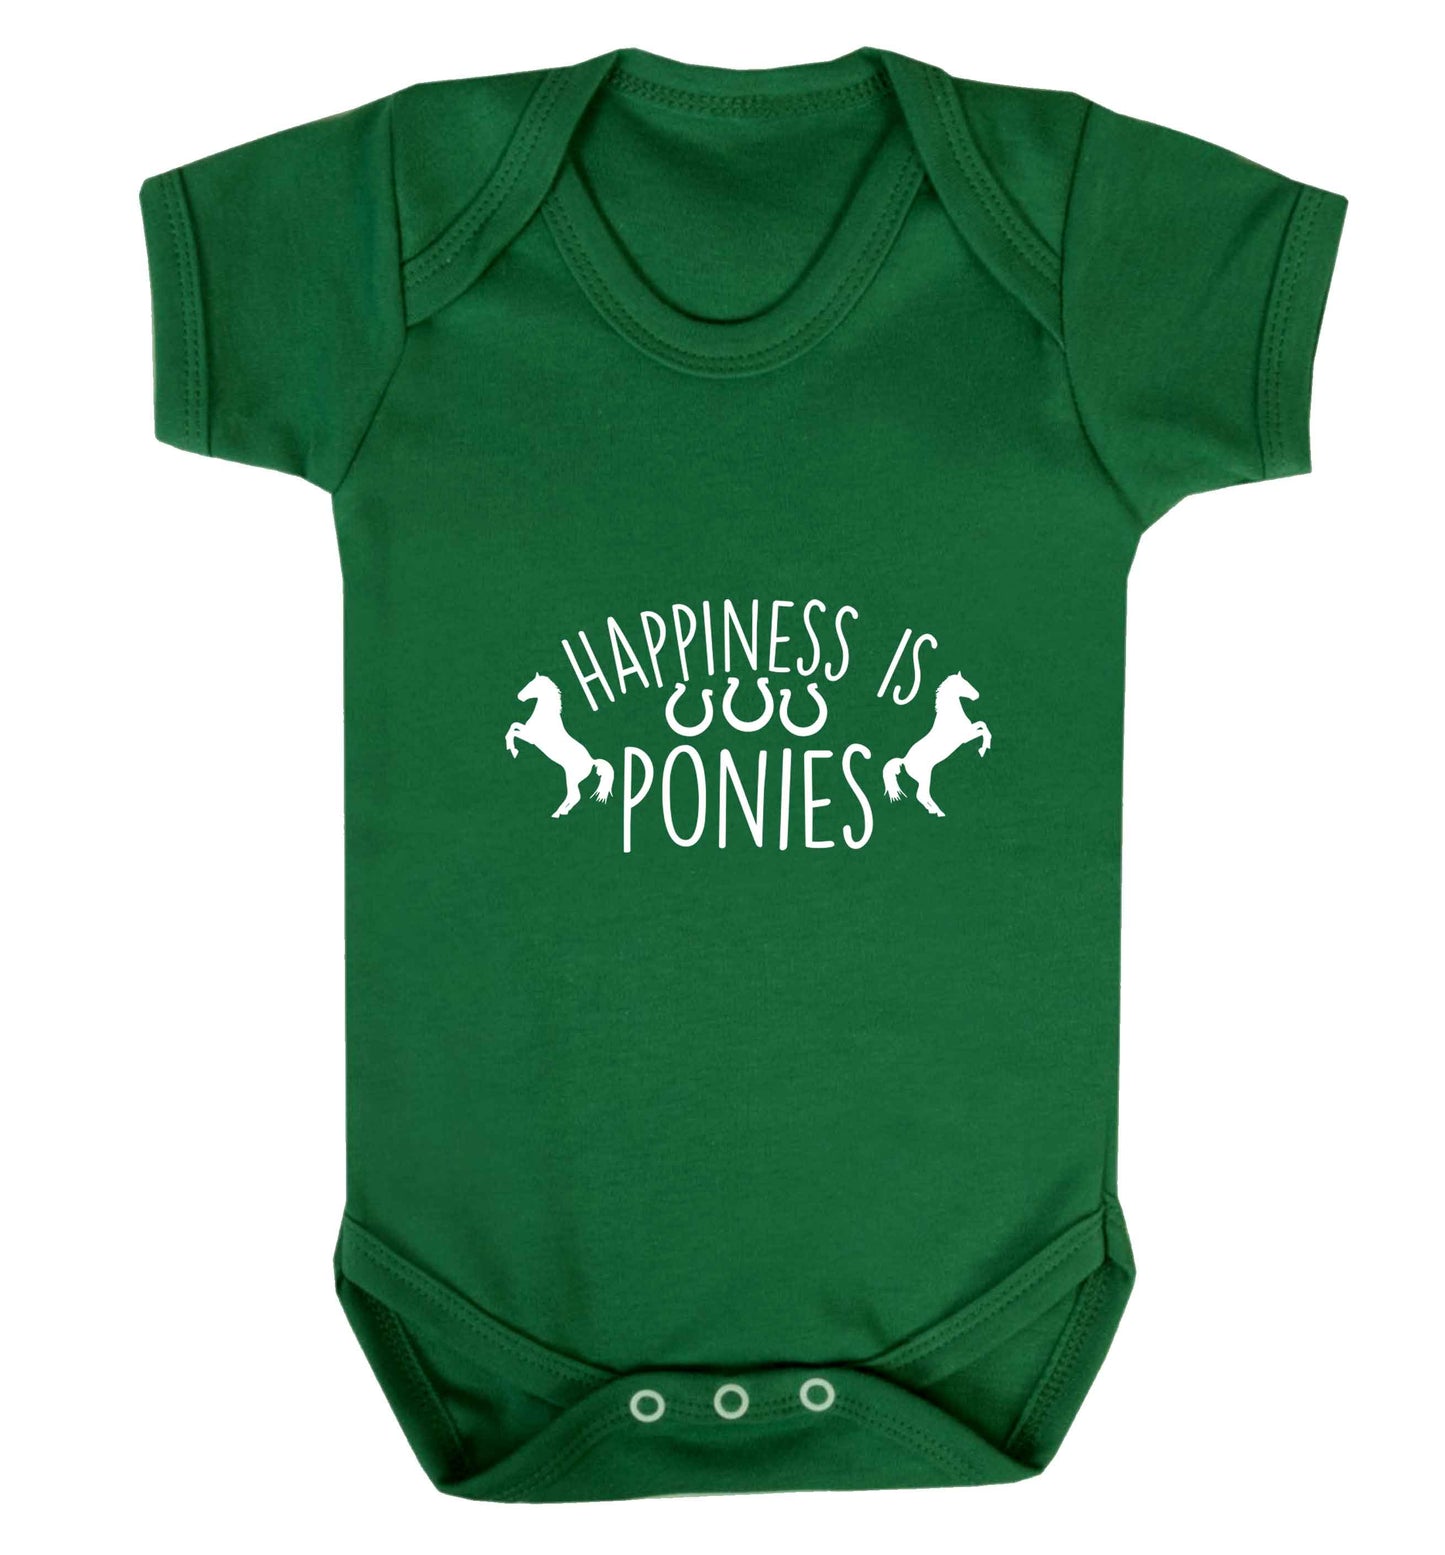 Happiness is ponies baby vest green 18-24 months